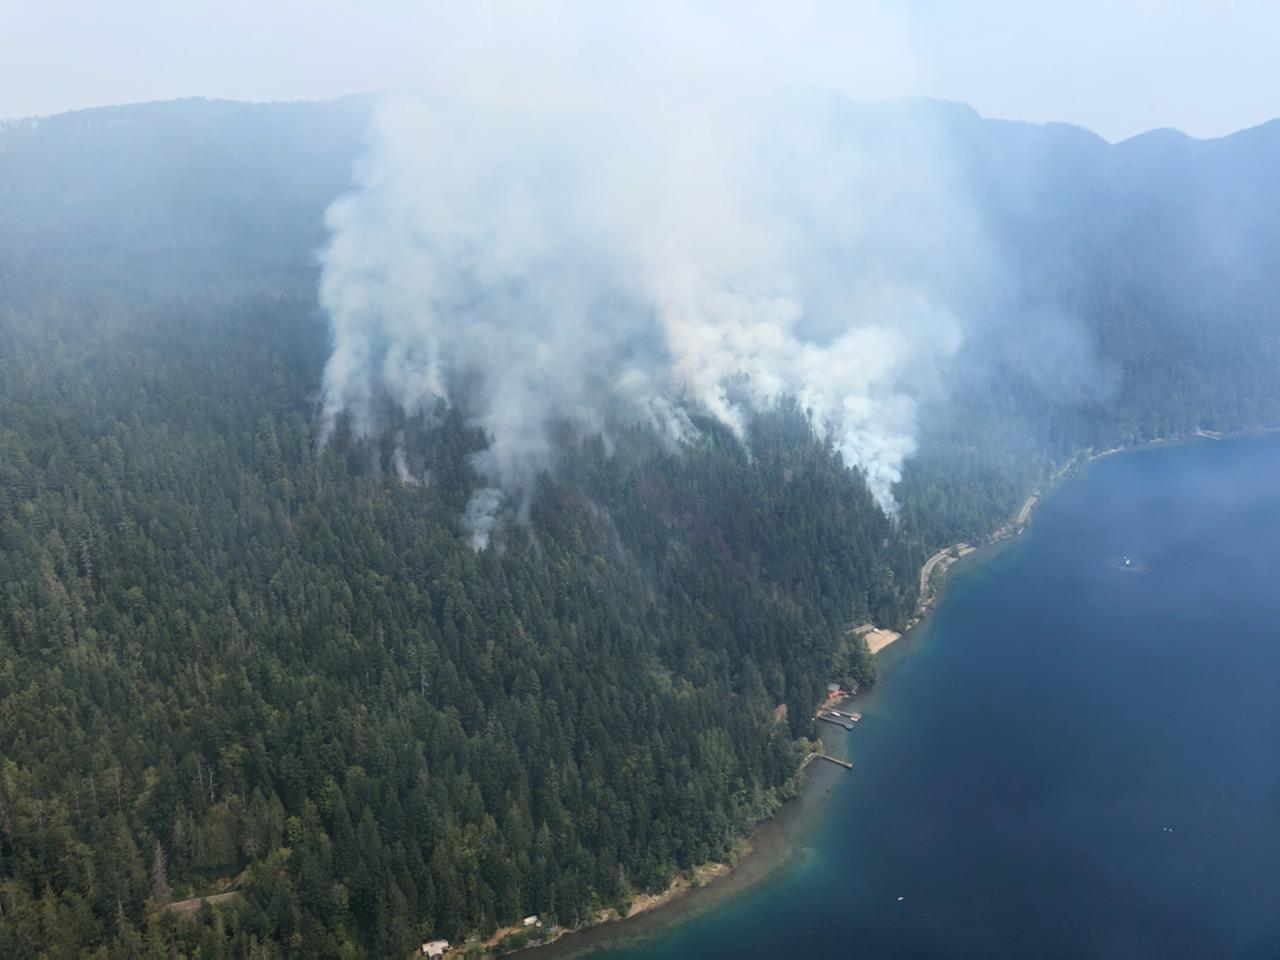 An aerial photo of smoke from a wildfire burning in the forest next to a lake.